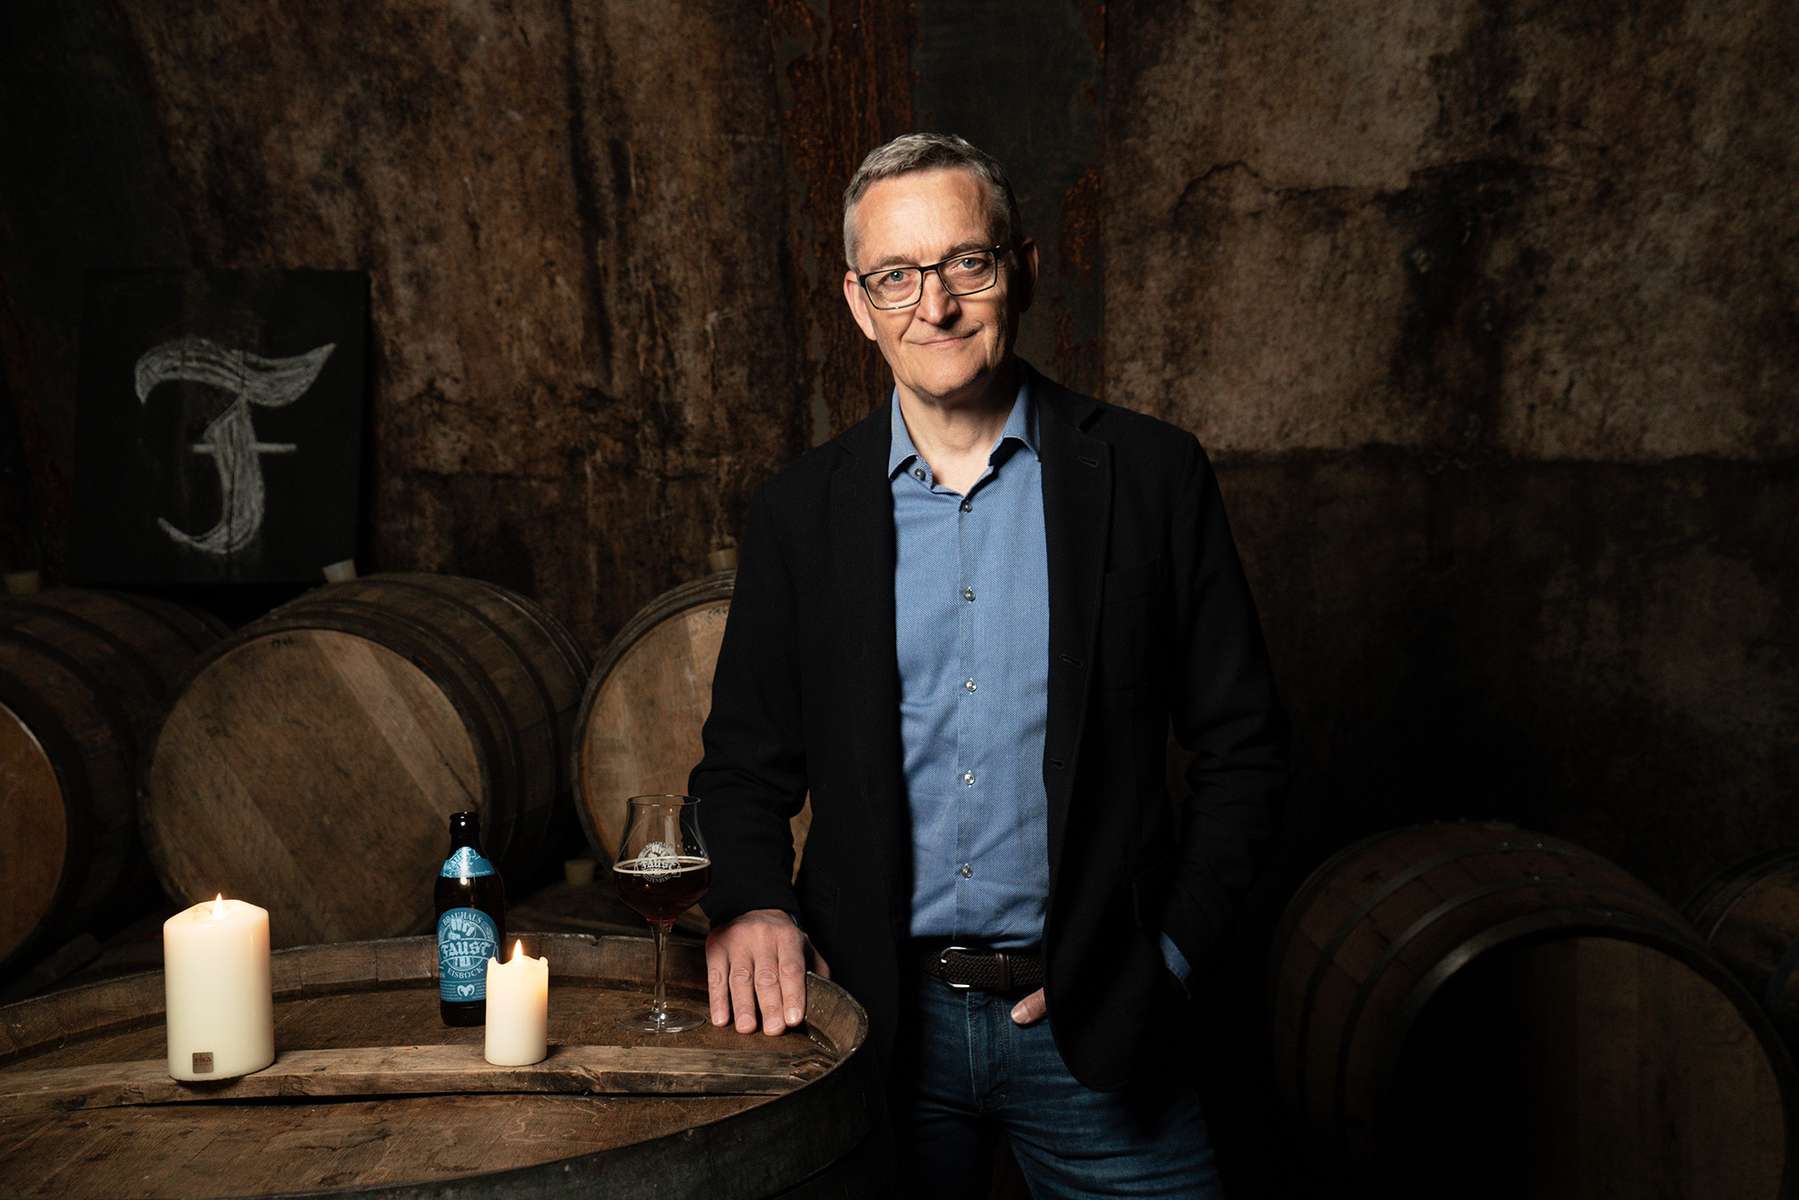 Johannes Faust, CEO of Brauhaus Faust, is standing in the historic beer cellar of his company's headquarter in Miltenberg in the German state of Bavaria